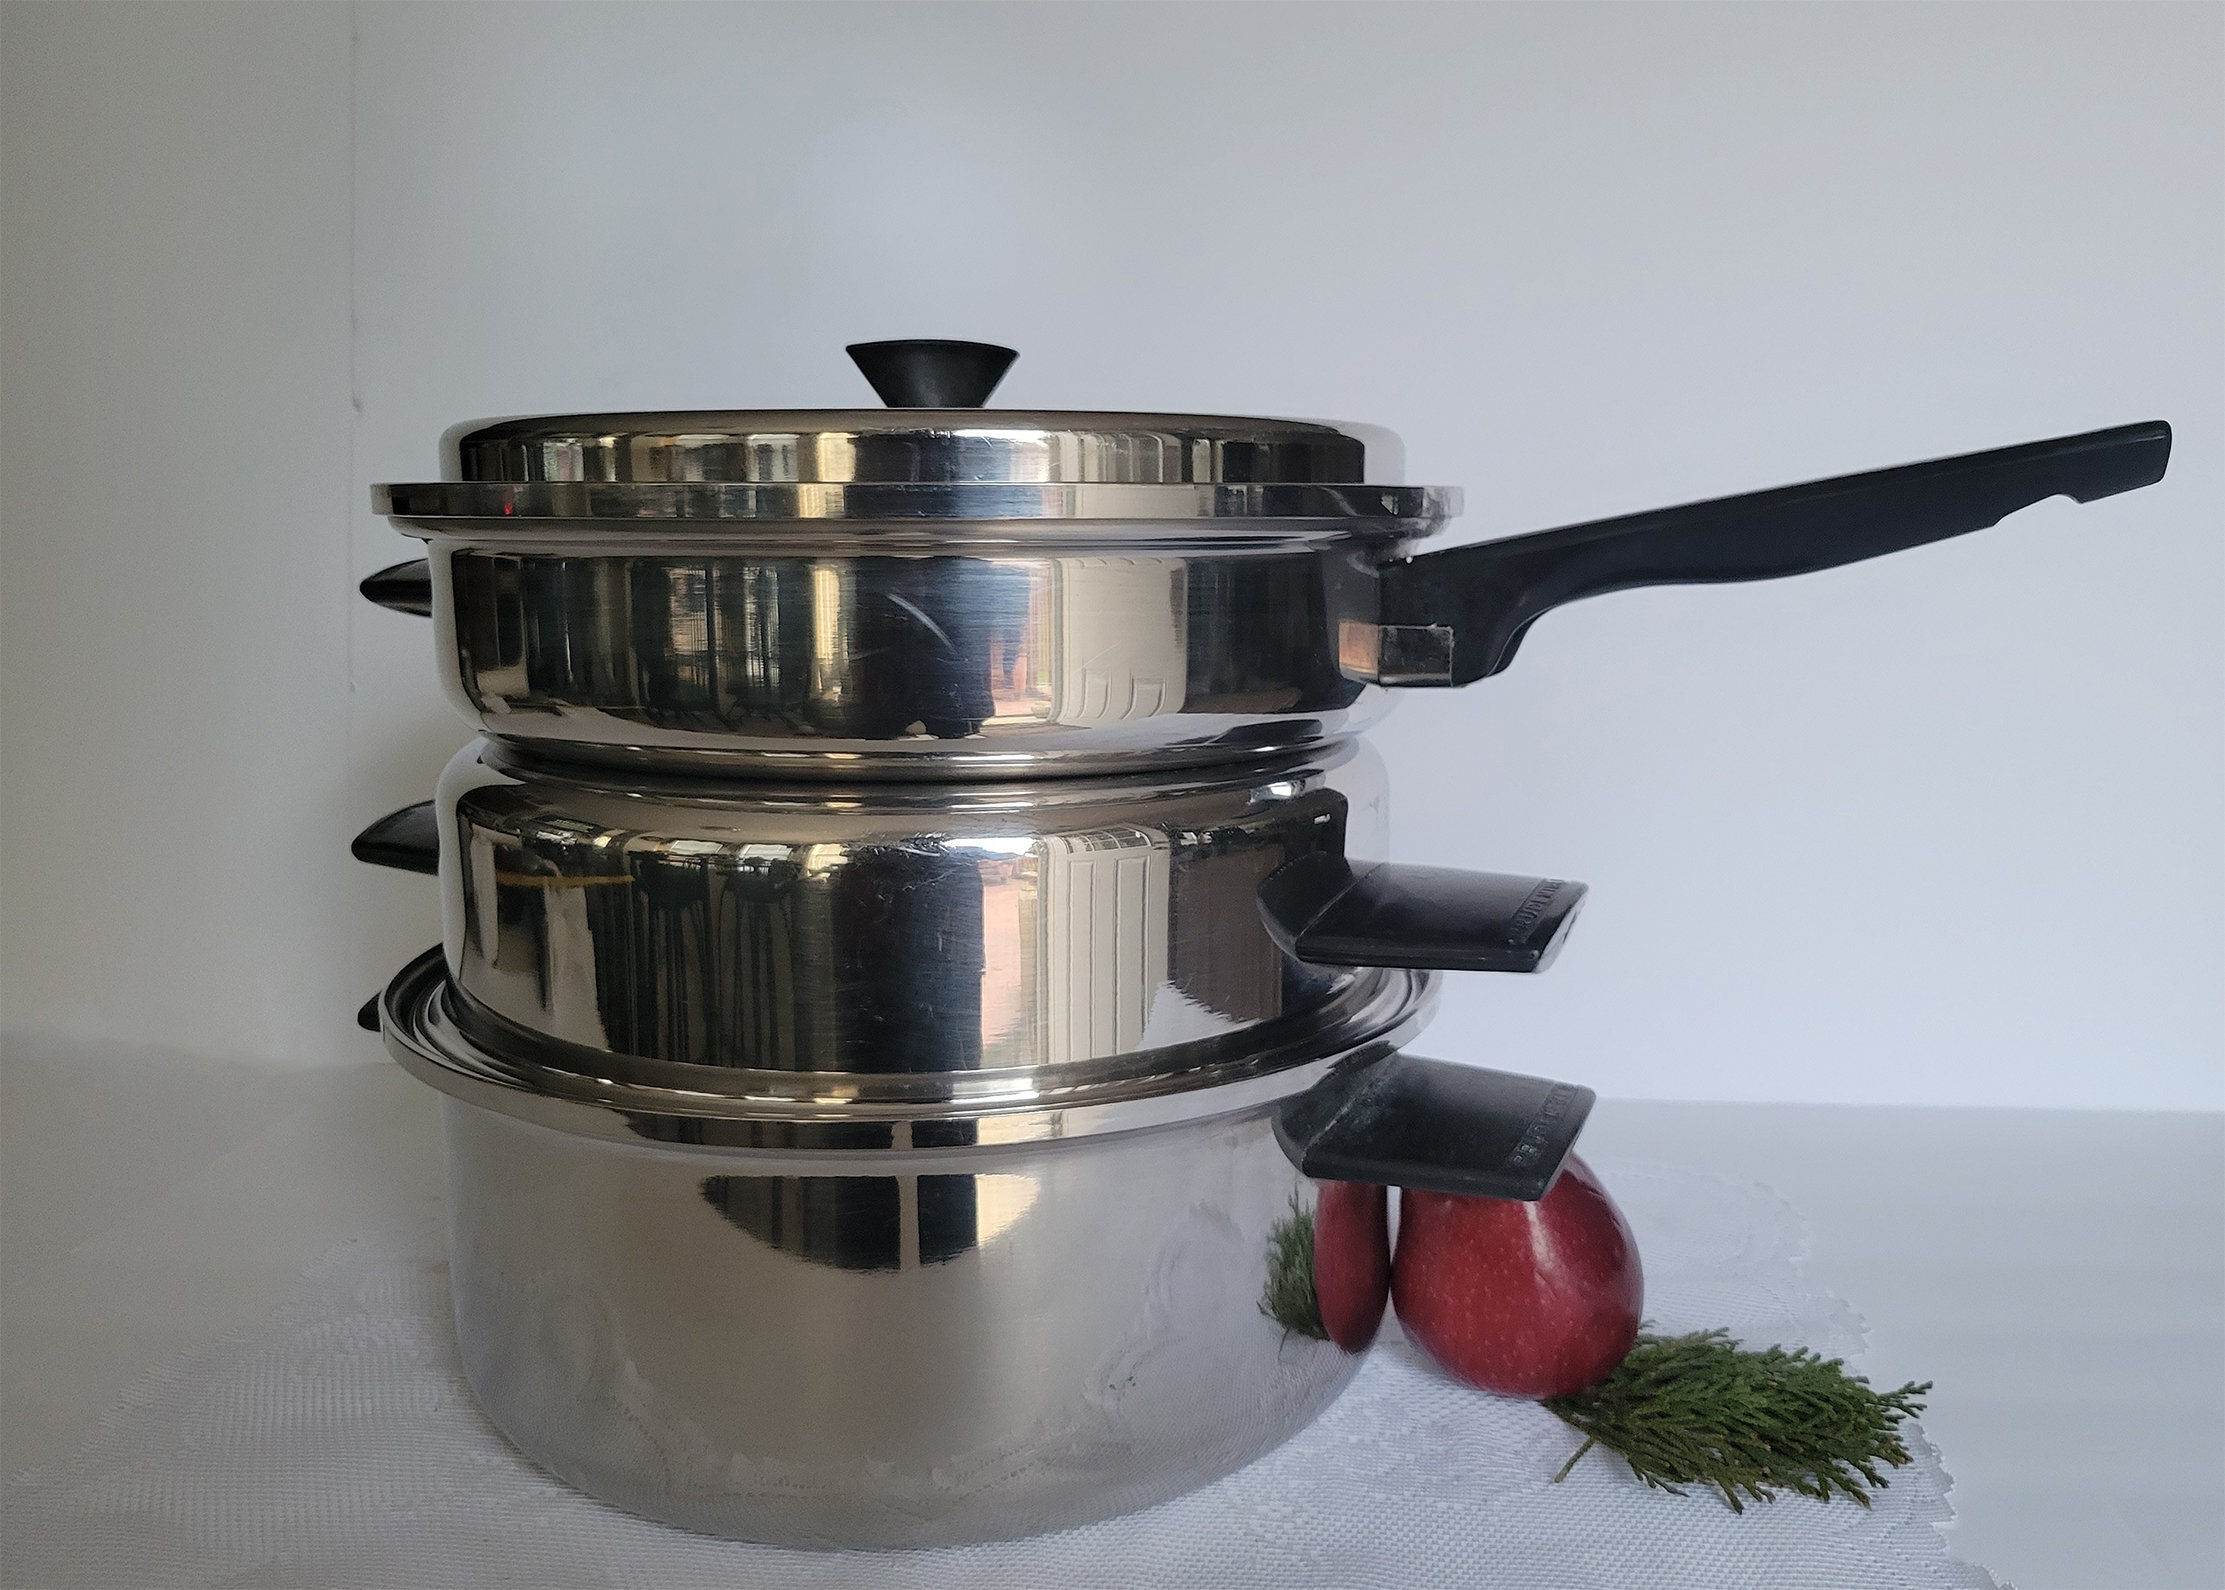 Royal Queen 5 Qt Multicore 5 ply 304 Stainless Steel pan and dome